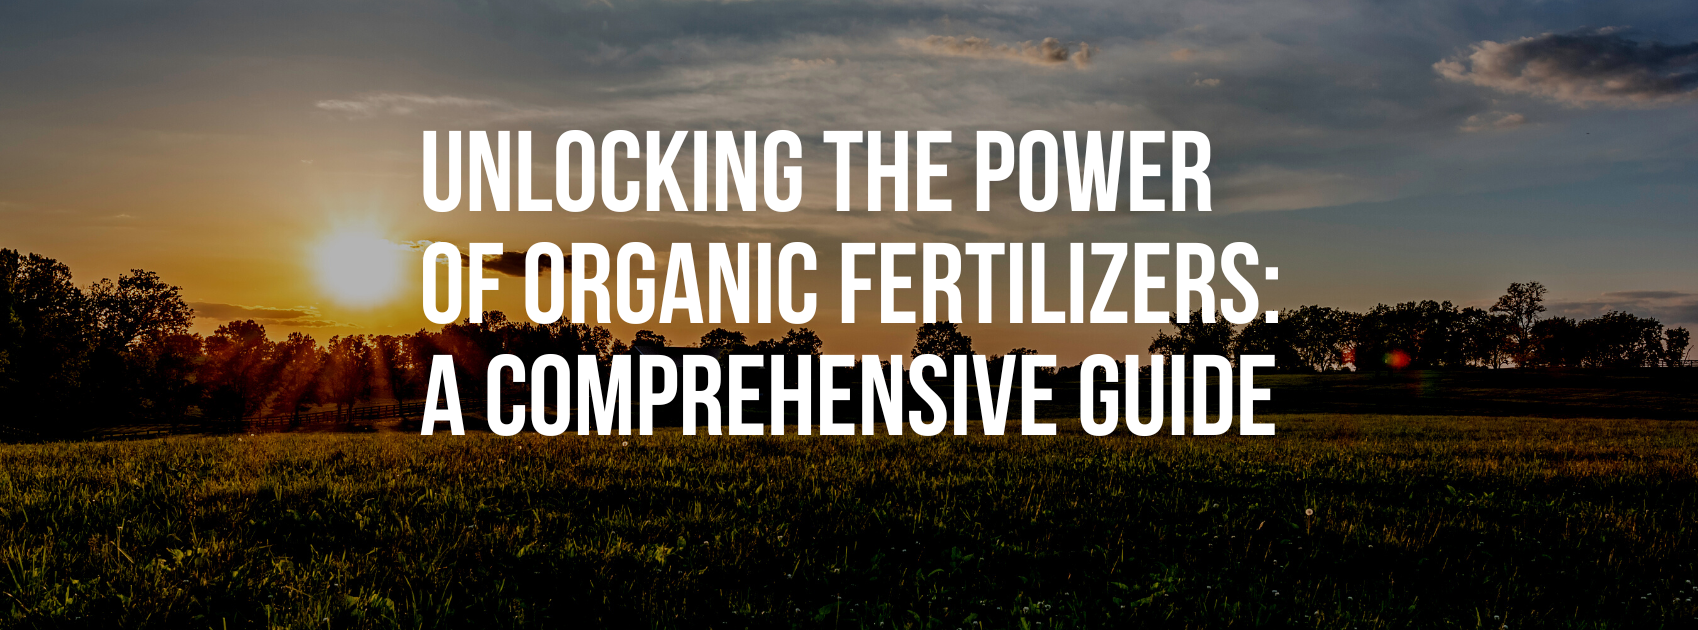 Unlocking the Power of Organic Fertilizers: A Comprehensive Guide